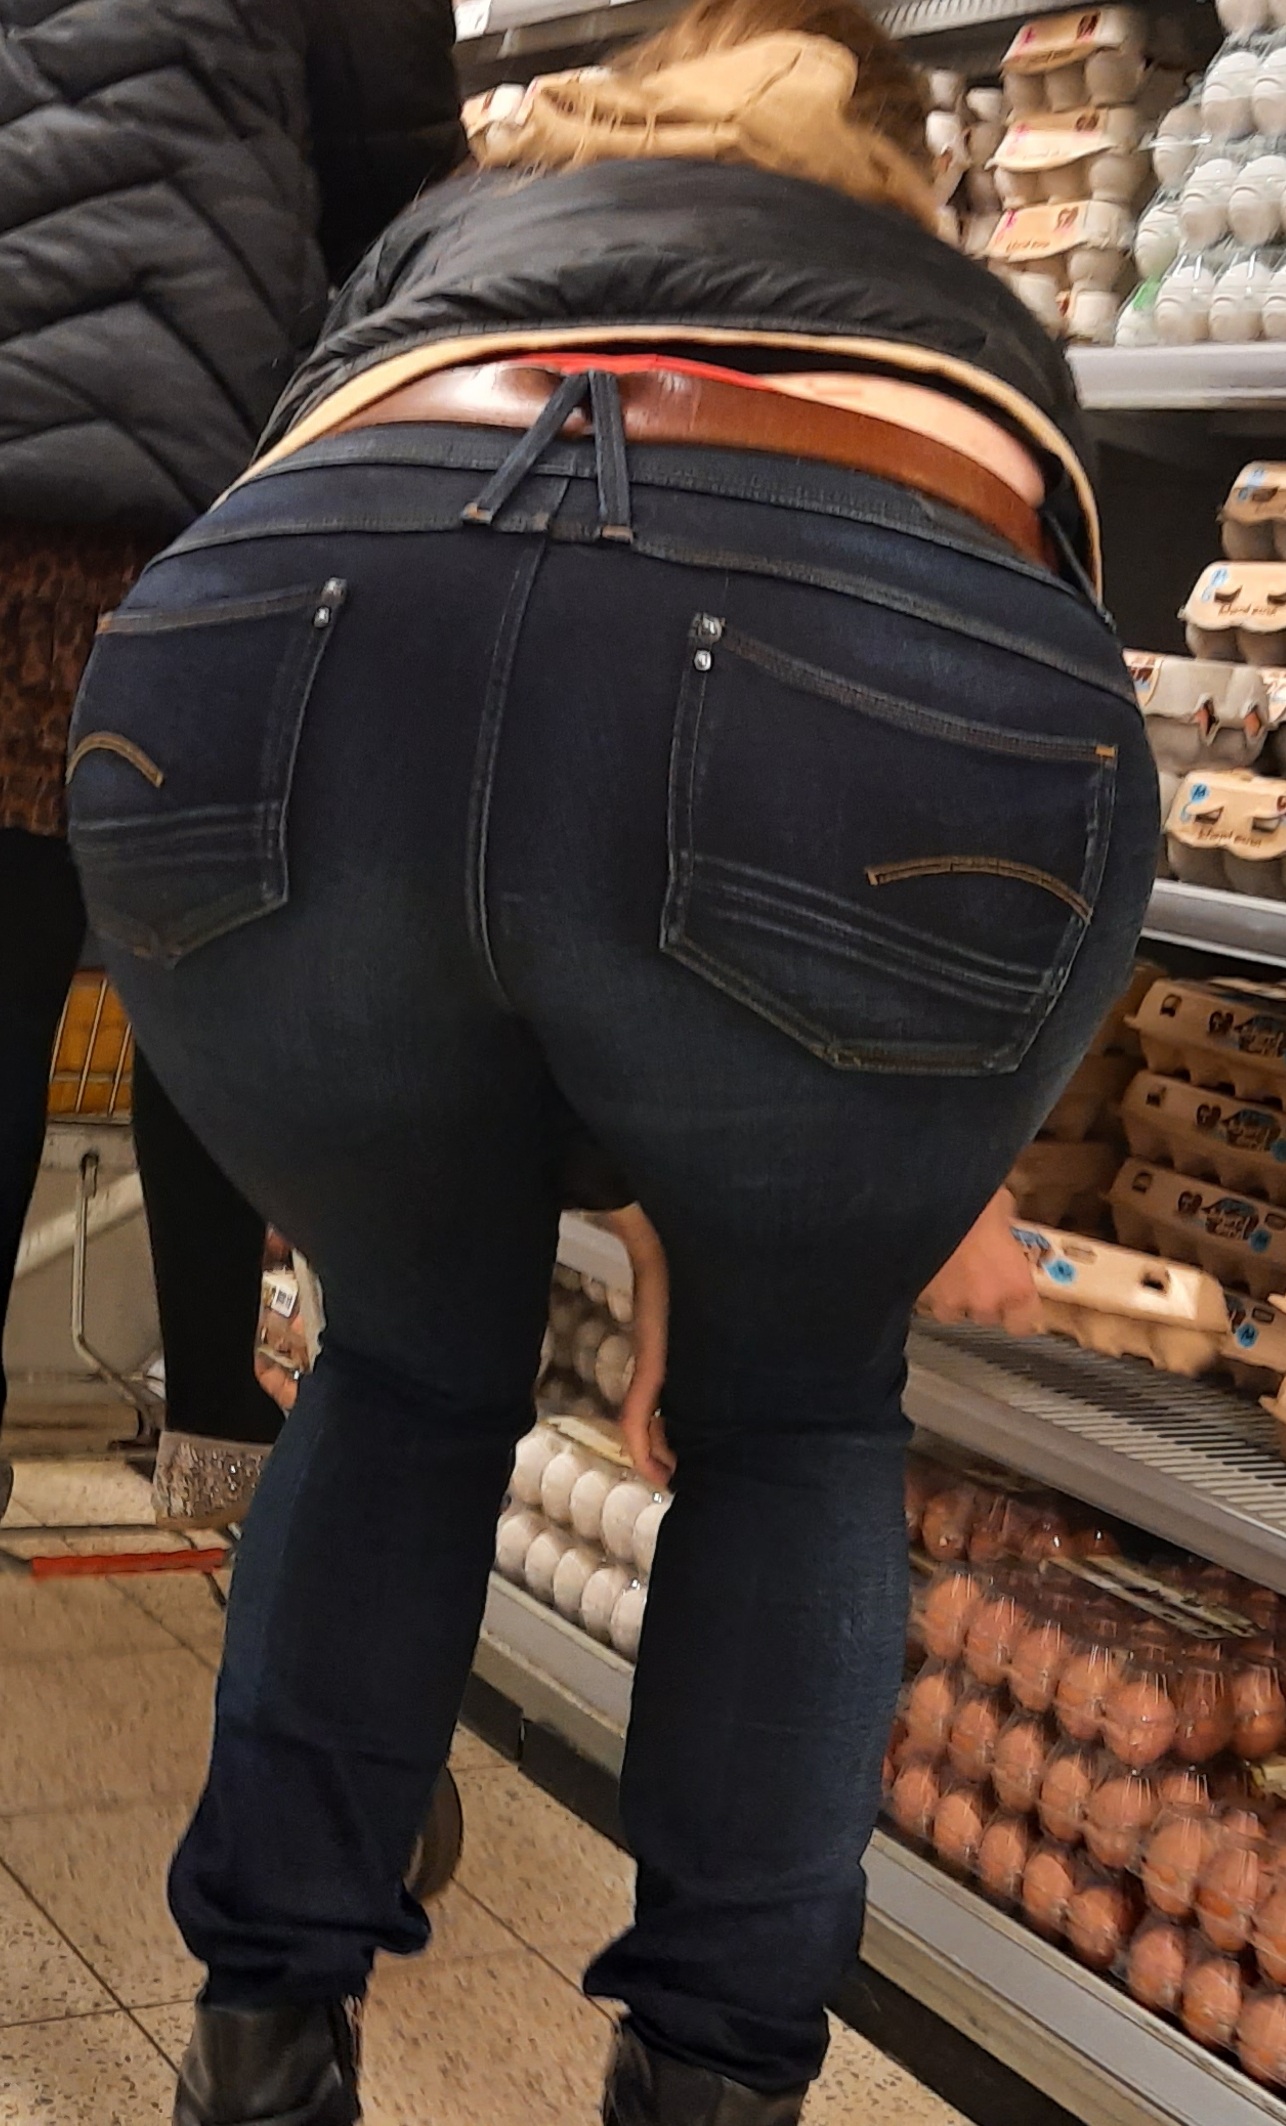 Bending Over In Store Tight Jeans For